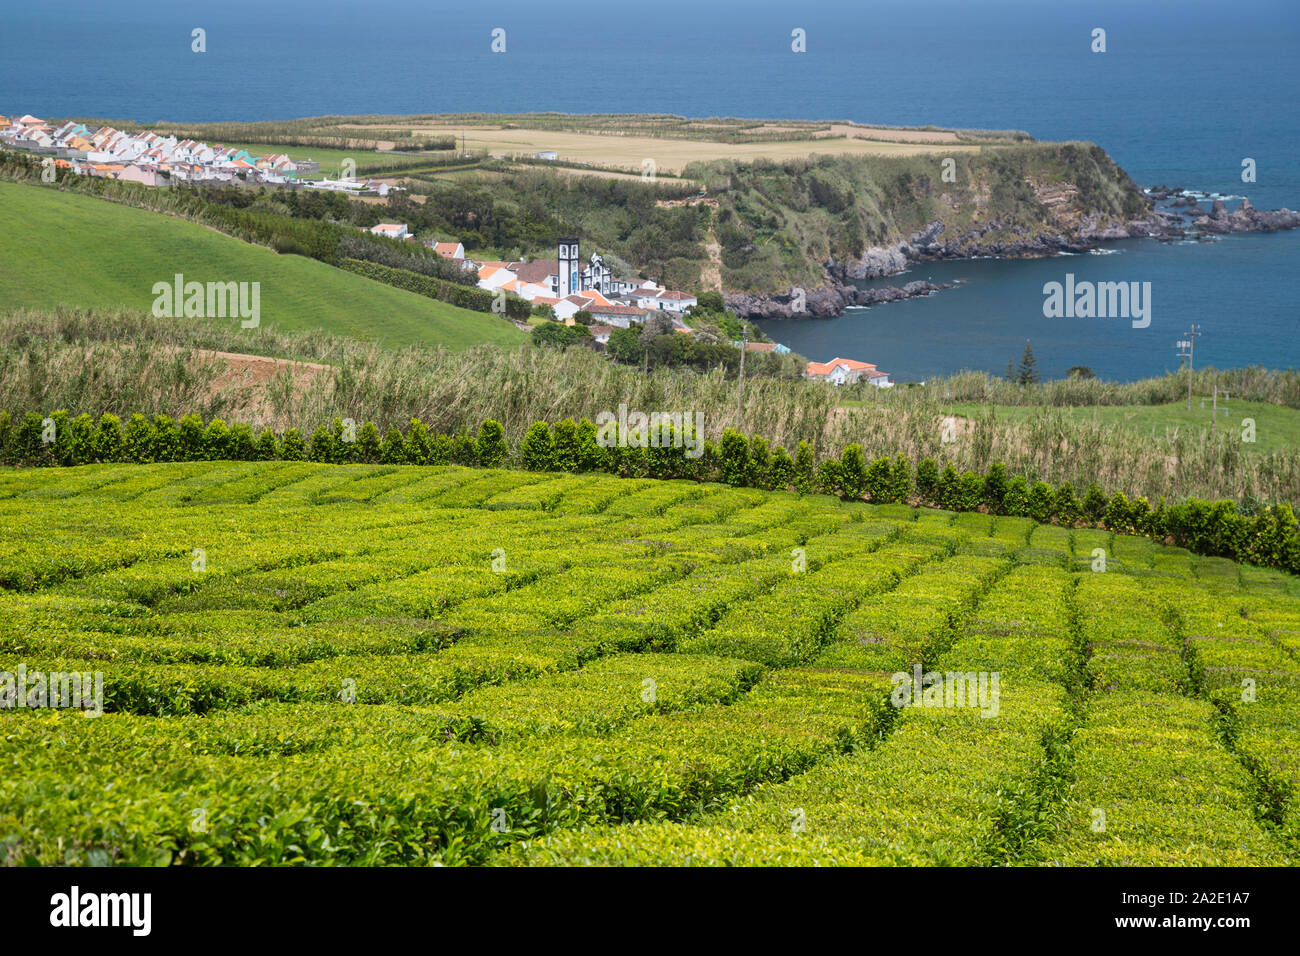 Tea plantation in Sao Miguel island, Azores. Organic and ethical tea production. Stock Photo